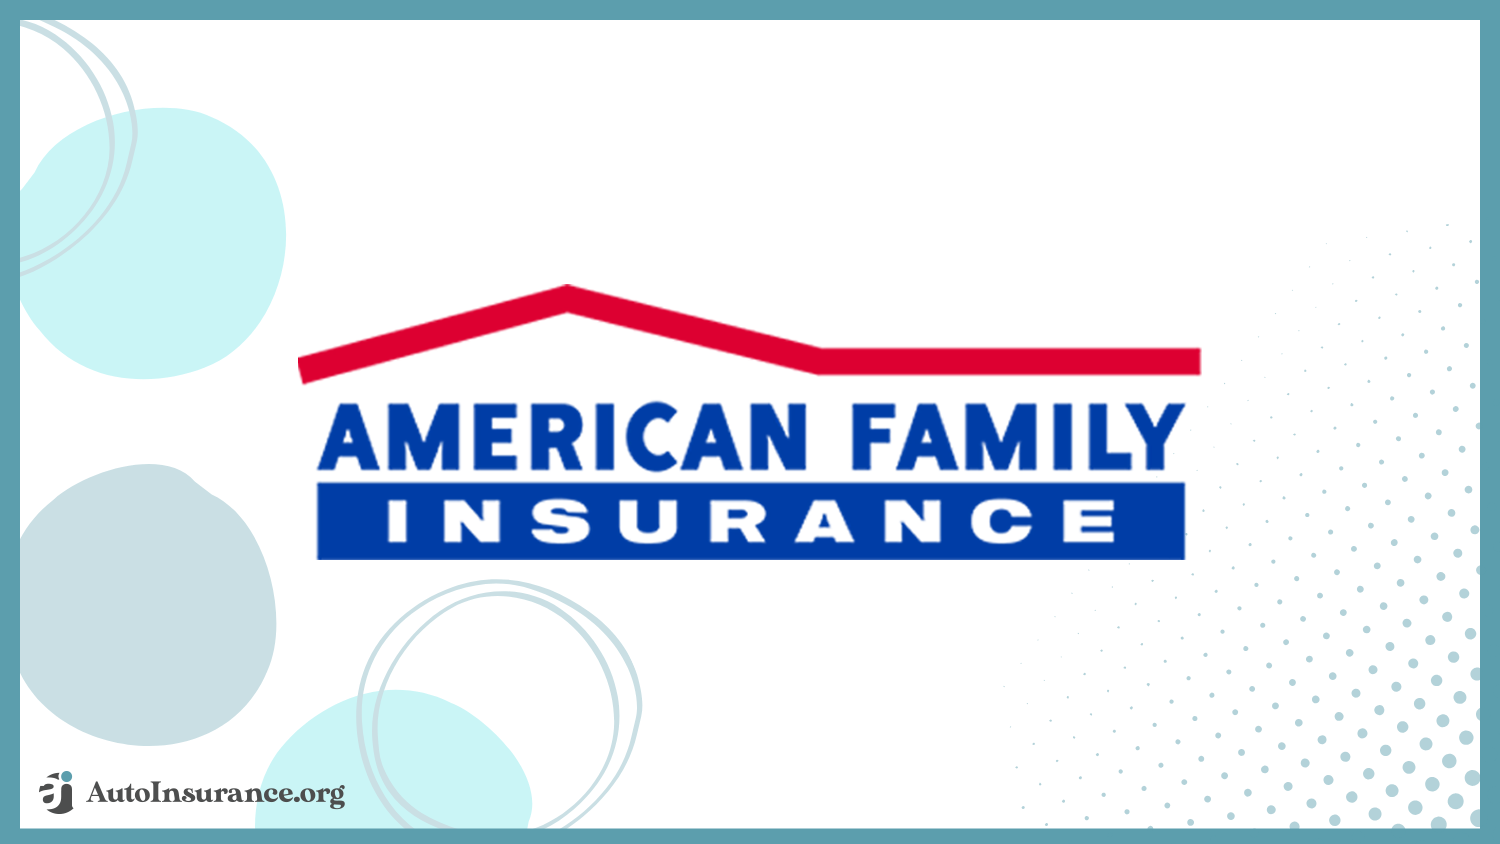 American Family: Best Auto Insurance Companies for Drivers With Bad Credit